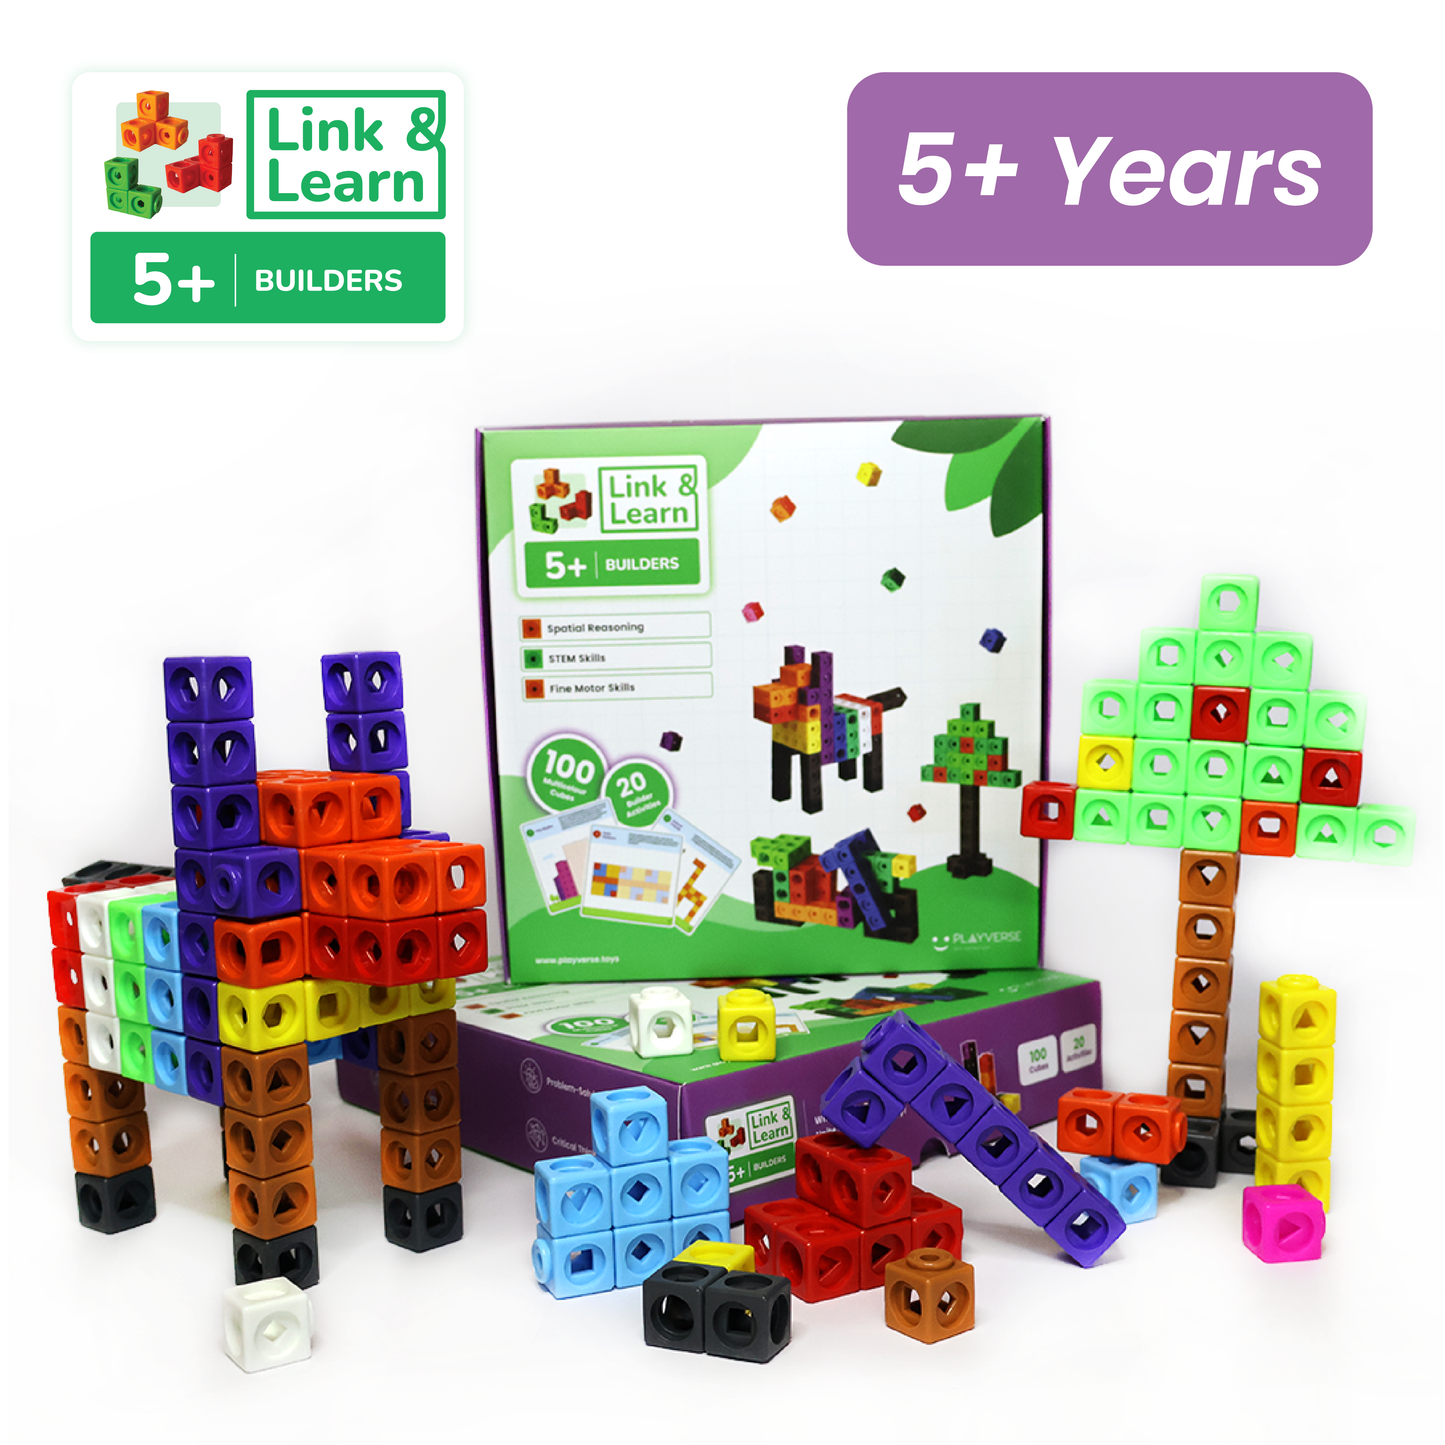 Link & Learn | The Builders Edition | 5+ years